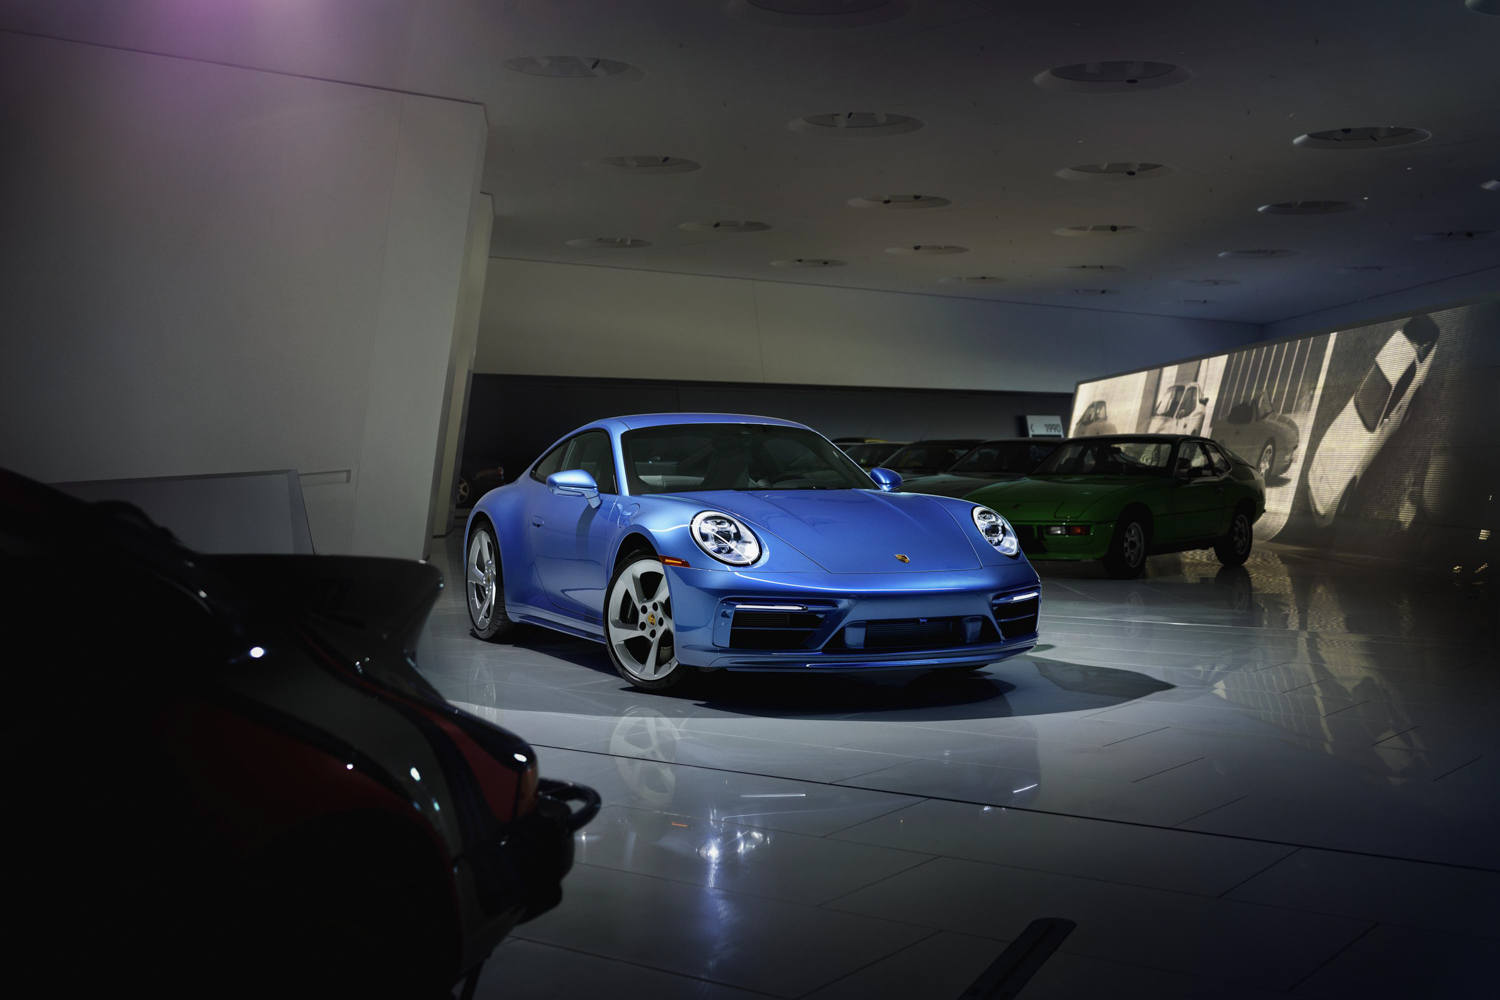 Porsche creates one-off ‘Sally Carrera’ - car and motoring news by CompleteCar.ie